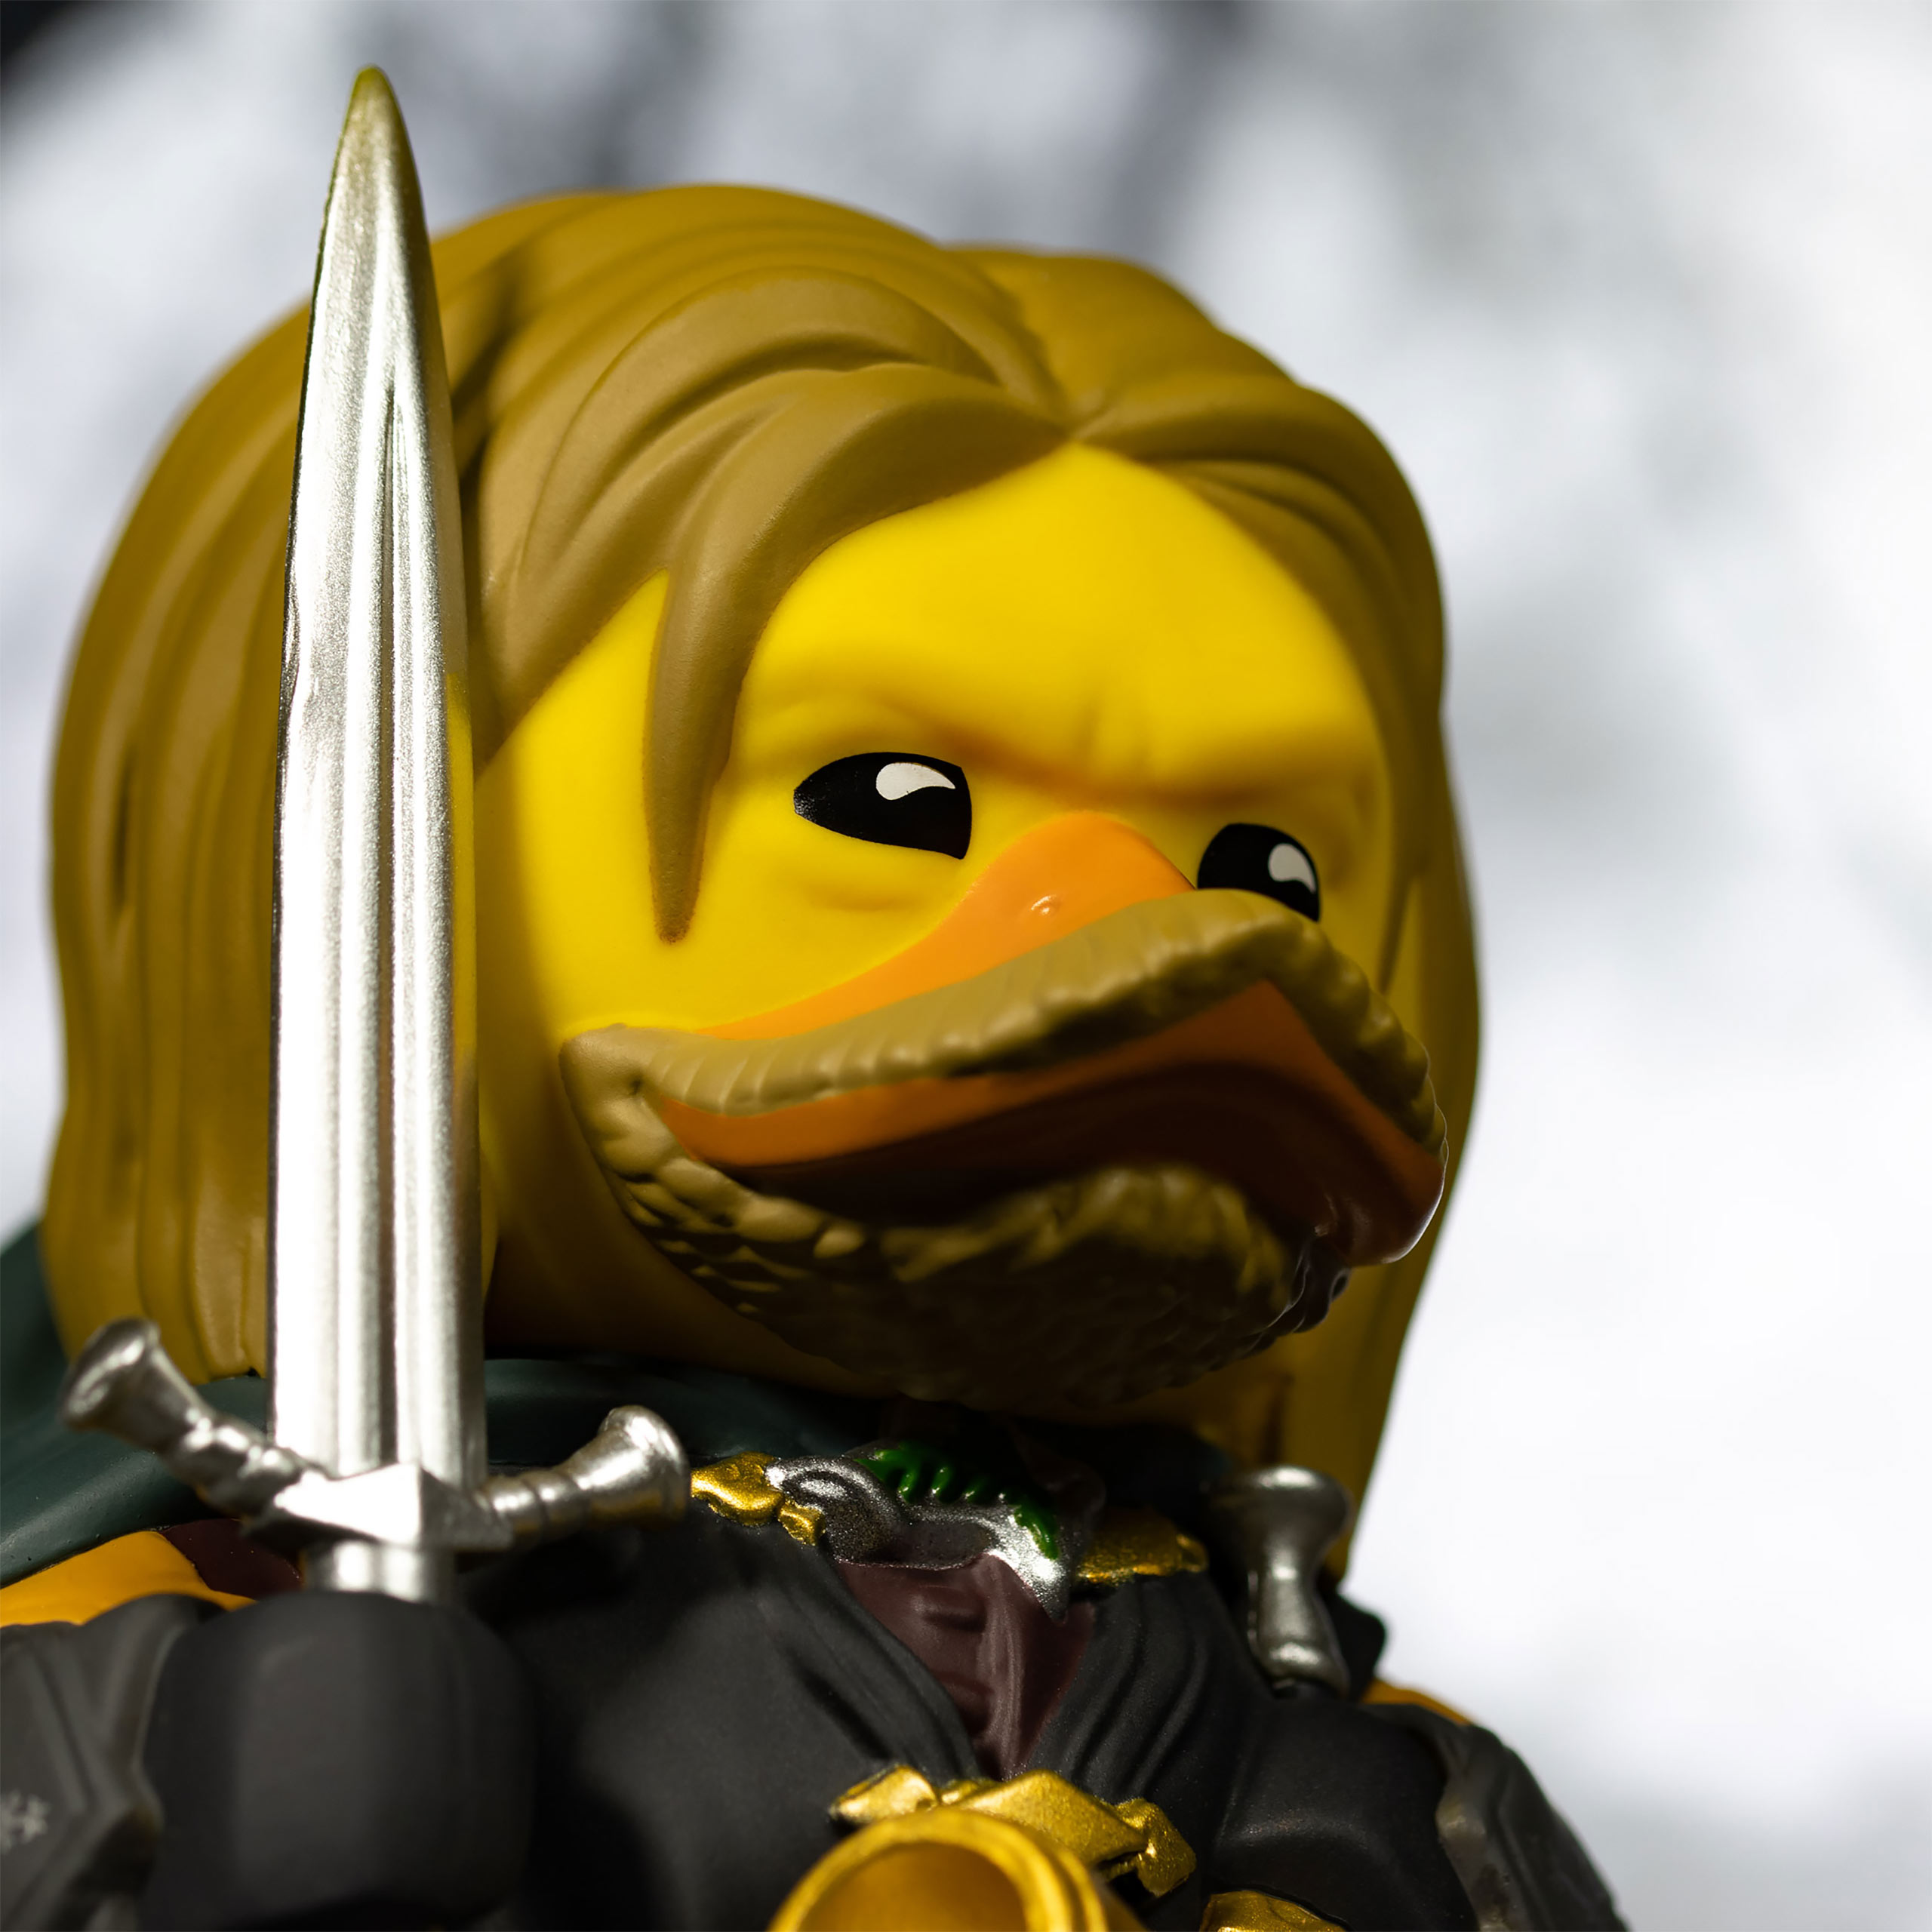 Lord of the Rings - Boromir TUBBZ Deco Duck